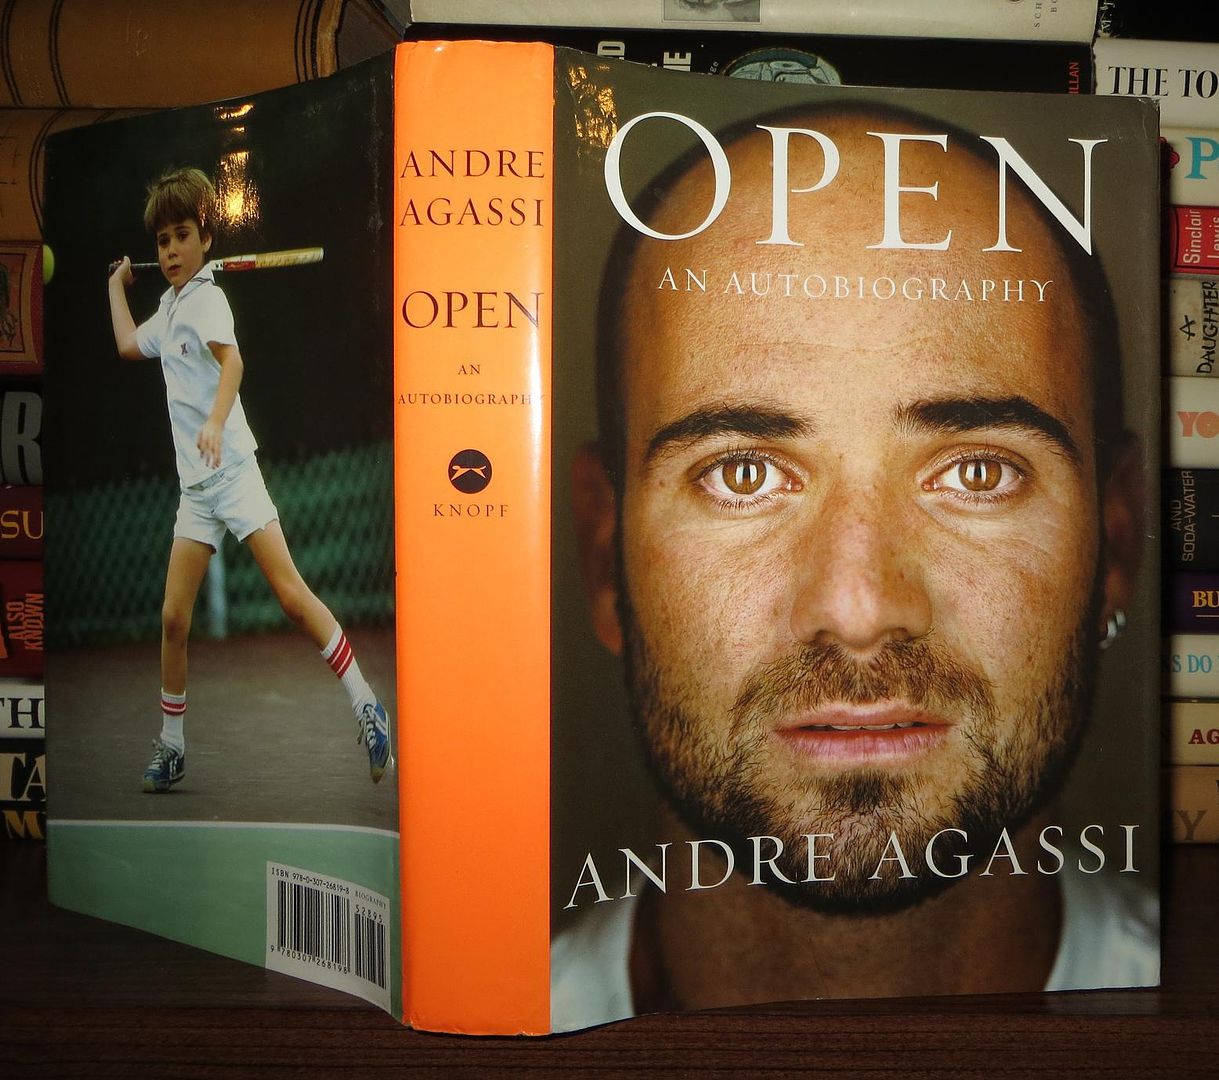 AGASSI, ANDRE - Open an Autobiography